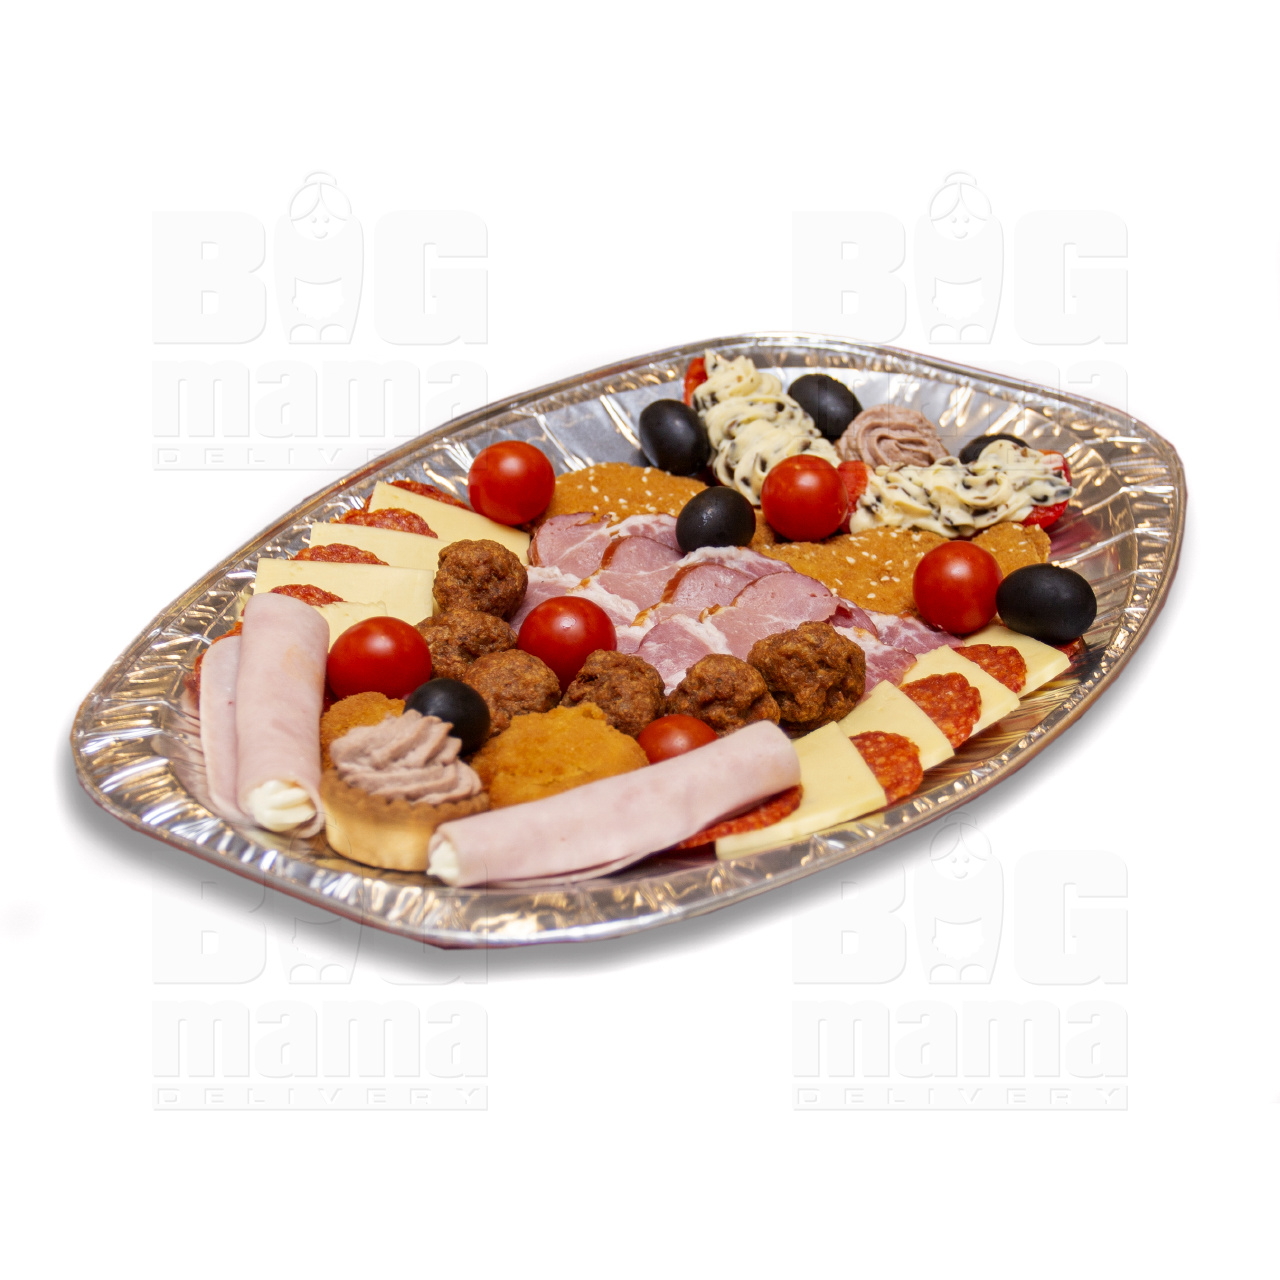 Product #221 image - Cold dish with Viennese pork schnitzel for 2 pers.